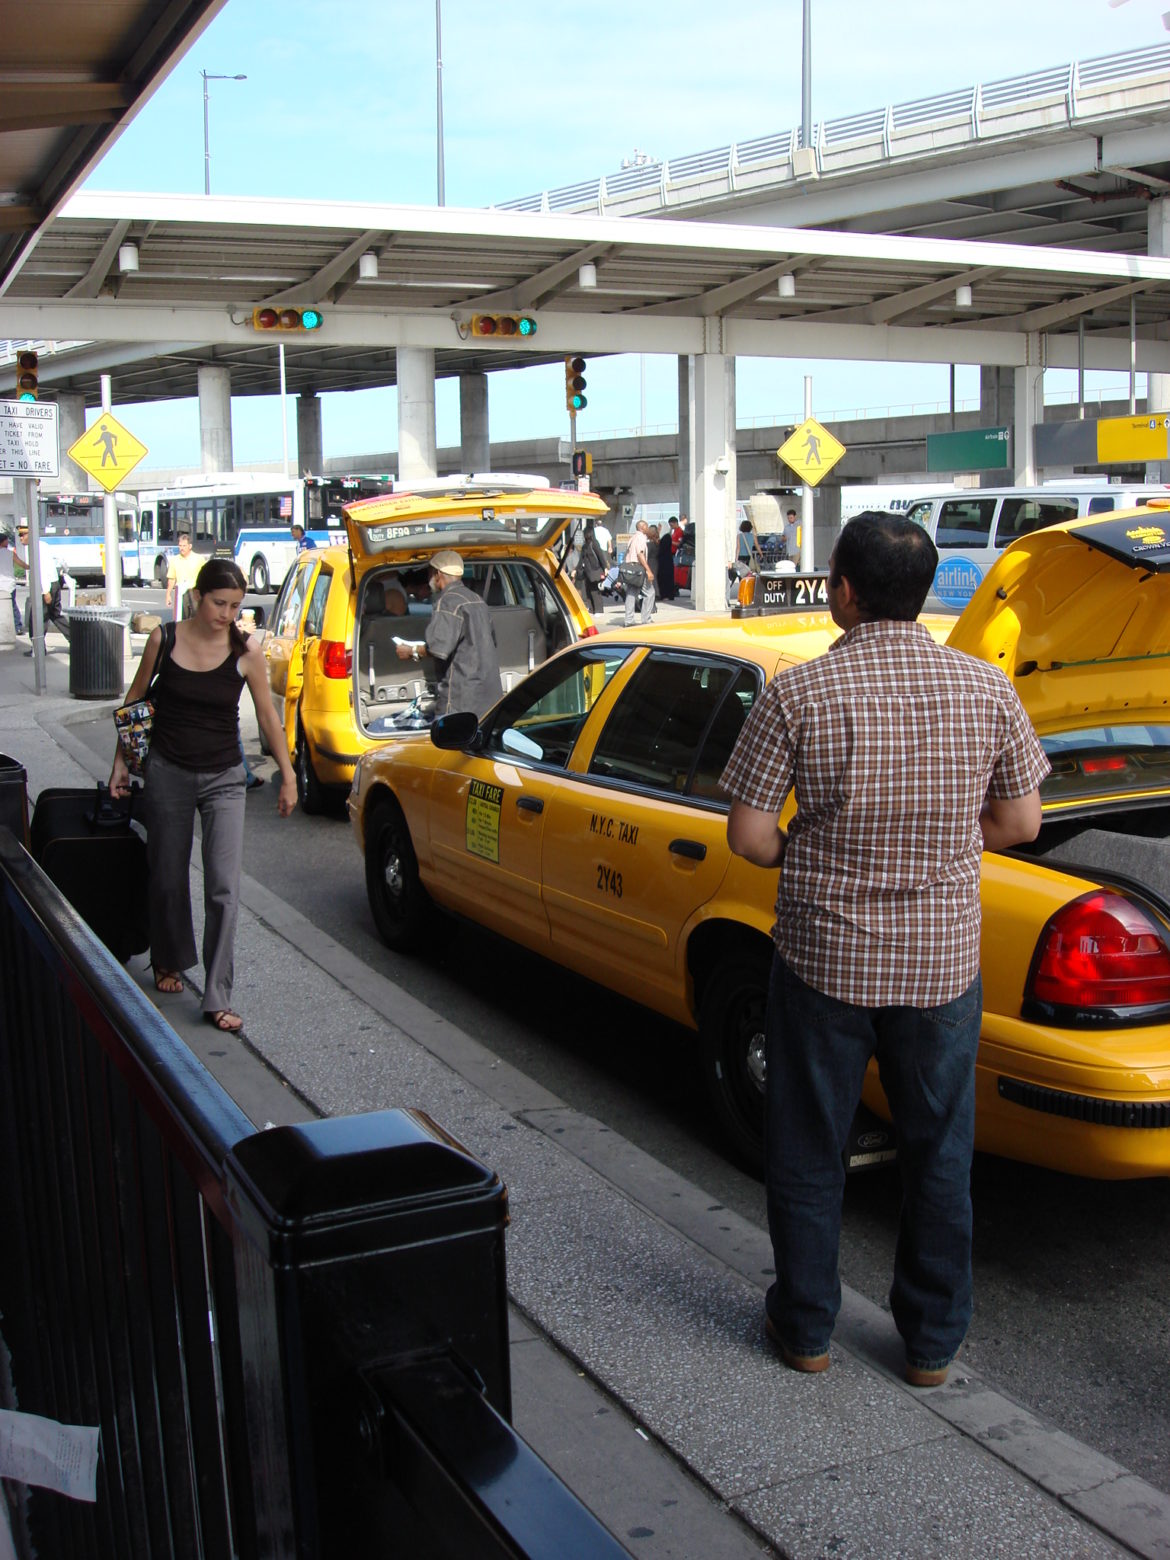 Waiting For A Taxi JFK Airport   New York 1170x1560 